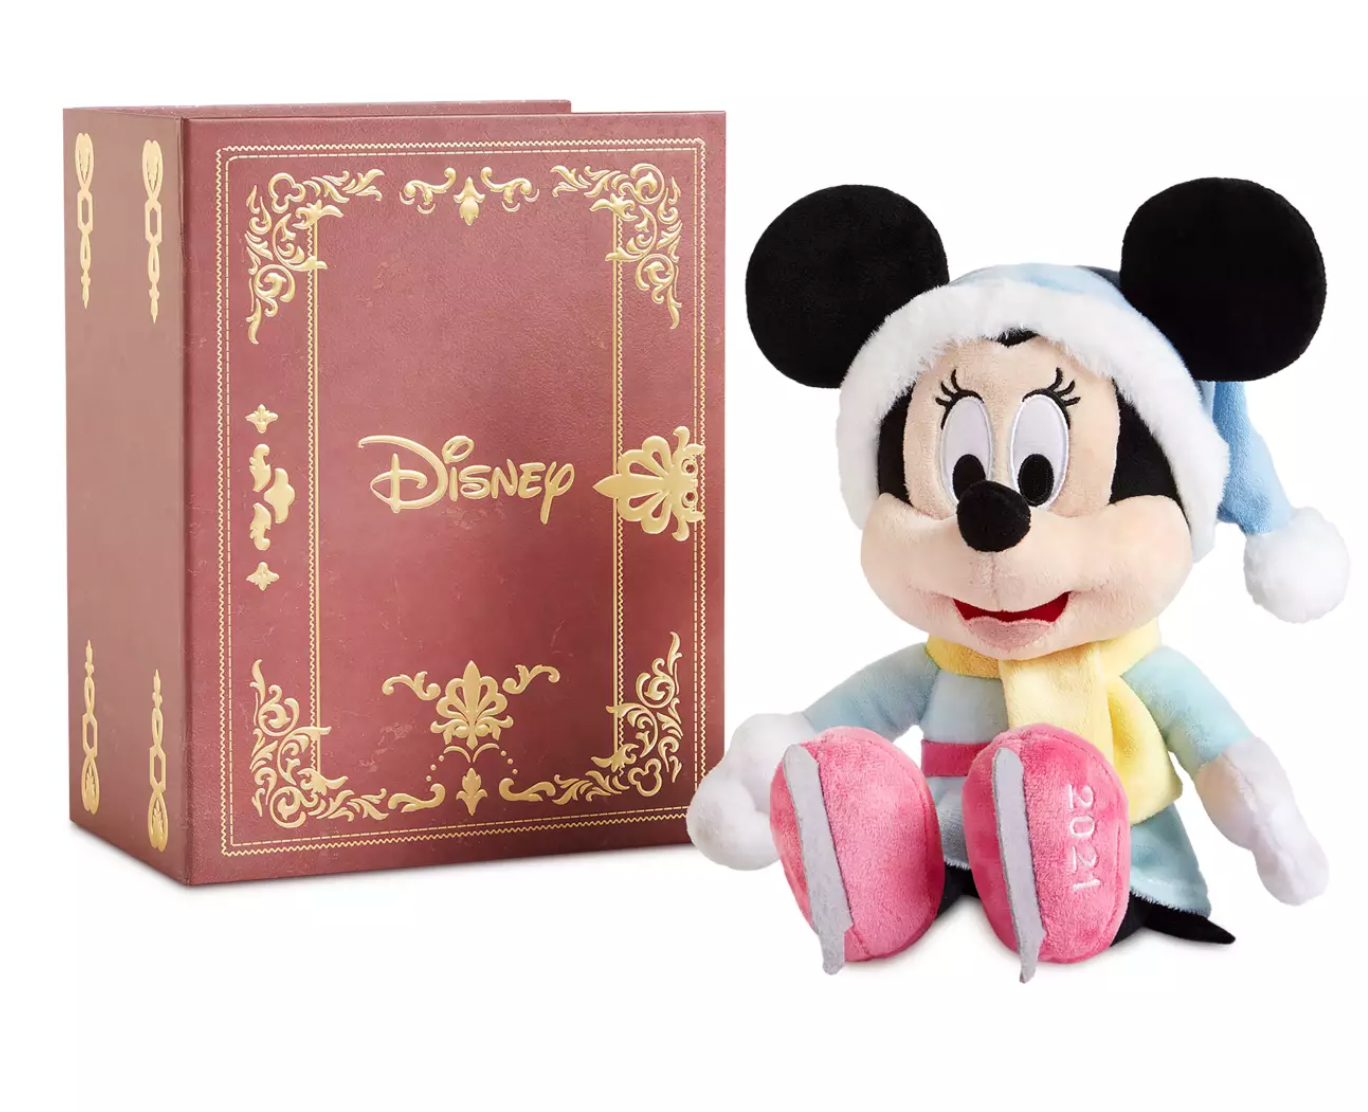 Disney Parks Minnie Mouse From Our Family to Yours Plush in Box 9'' New